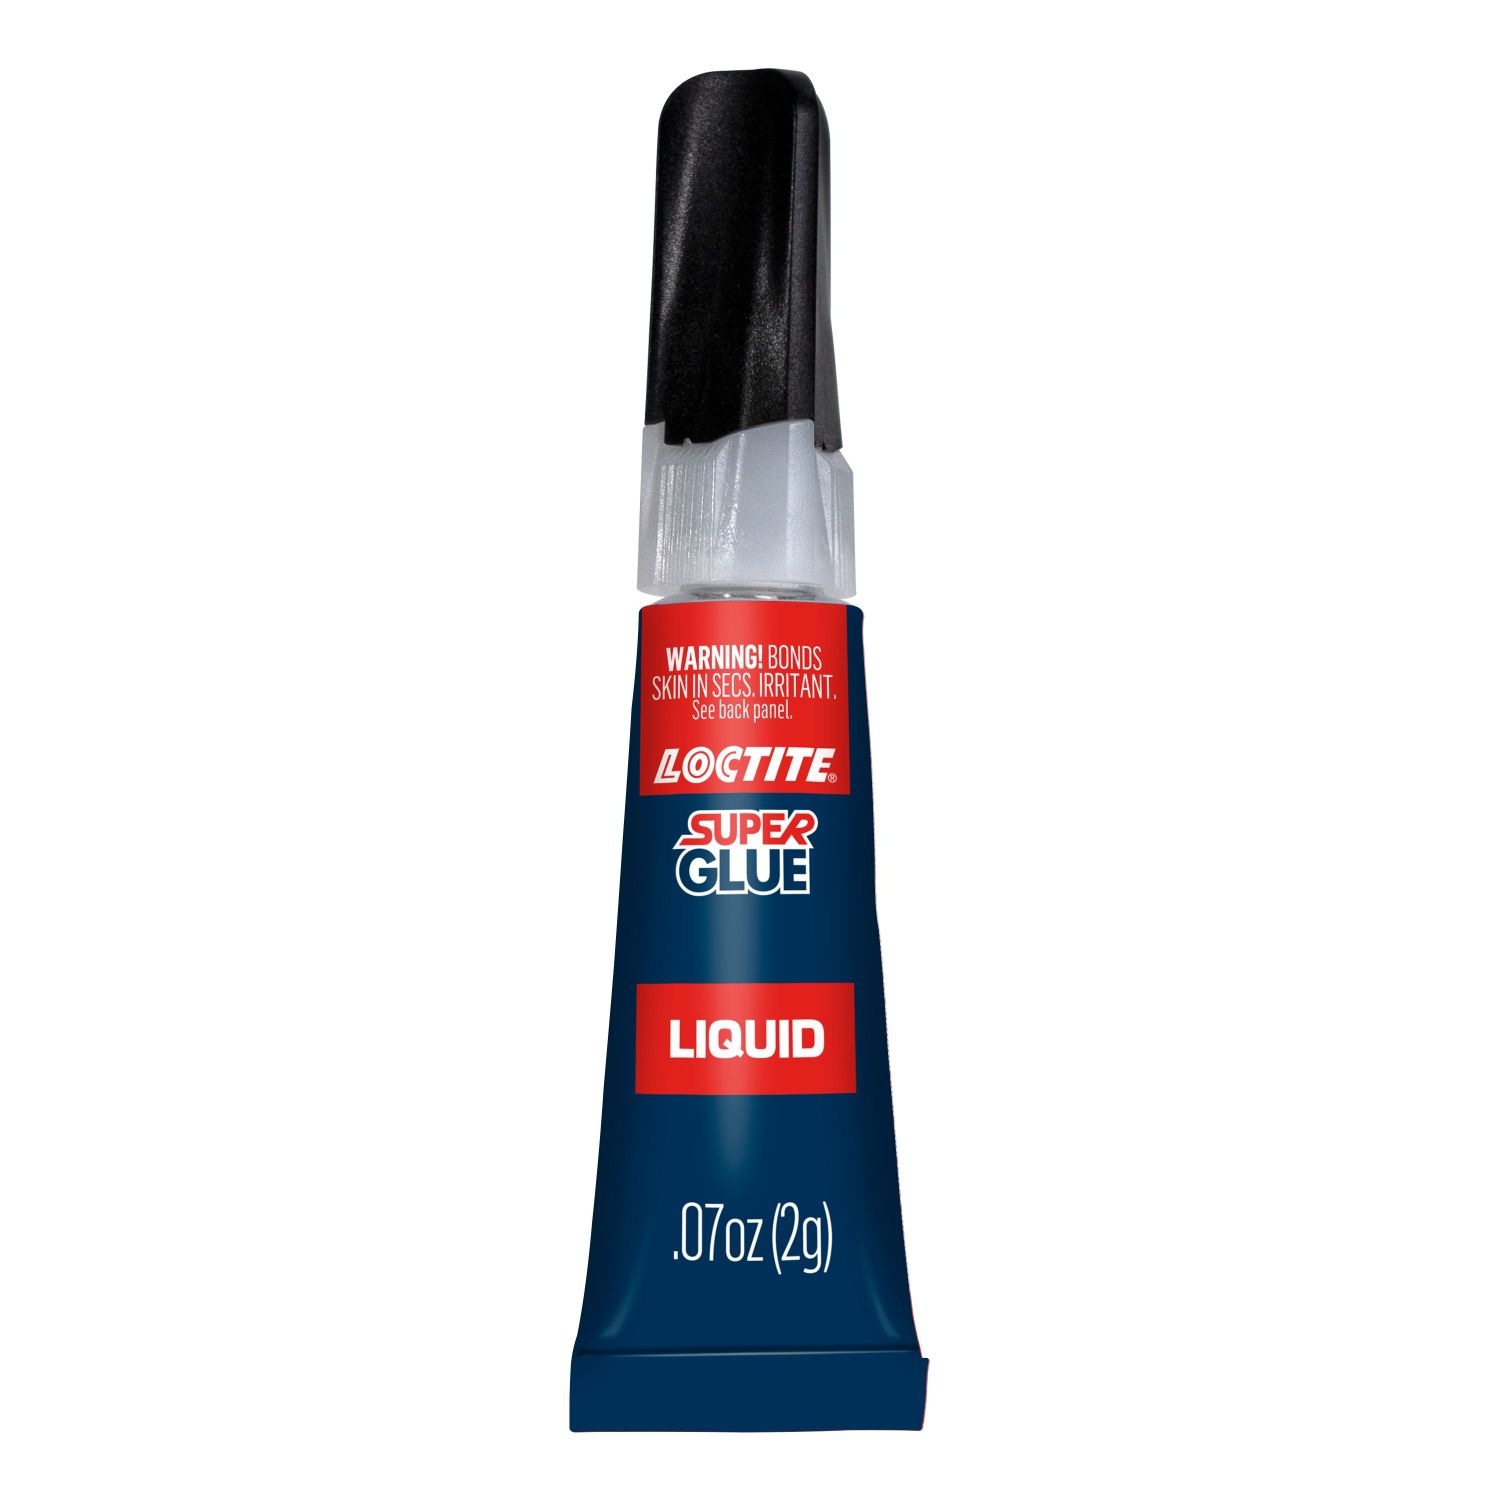 Loctite Super Glue Liquid Tube, 1 Pack of 2 Tubes, Clear 2 g Tubes - image 4 of 13